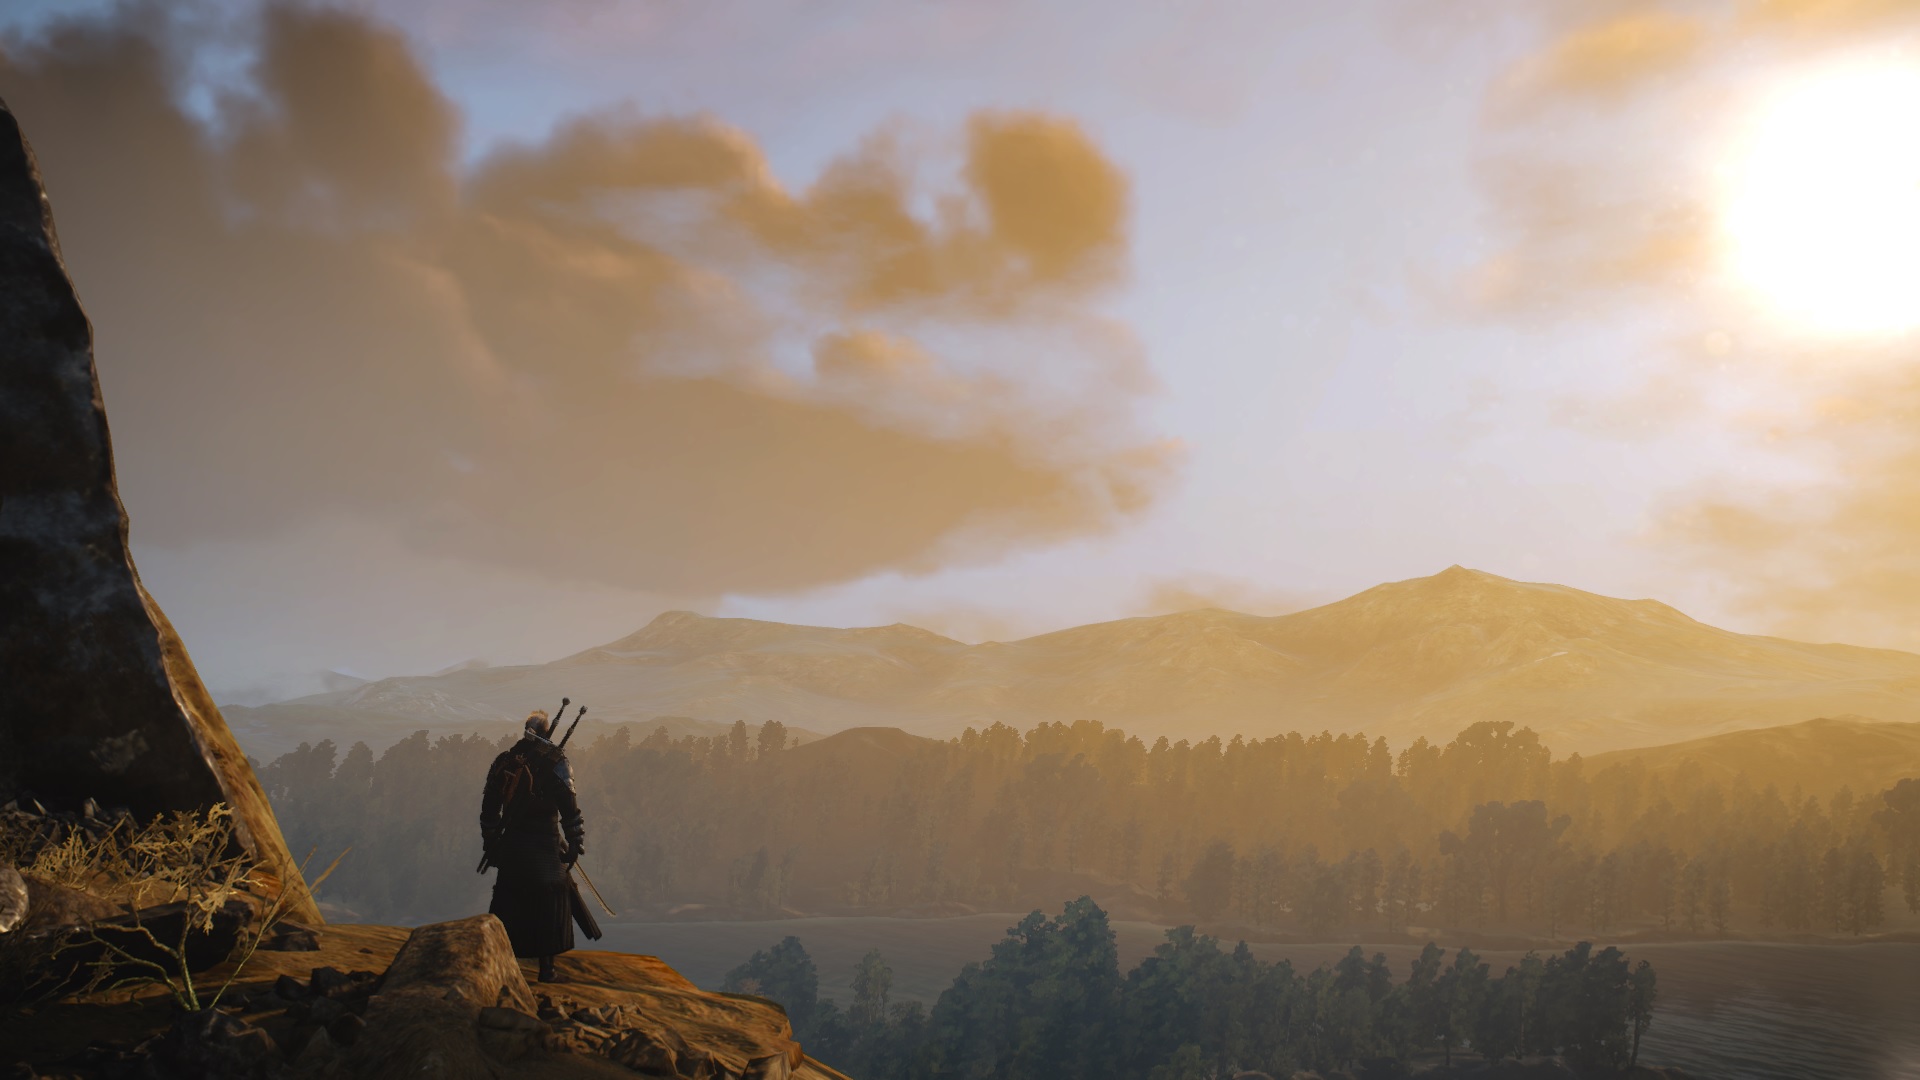 General 1920x1080 The Witcher The Witcher 3: Wild Hunt The Witcher 3: Wild Hunt – Hearts of Stone The Witcher 3: Wild Hunt - Blood and Wine Geralt of Rivia